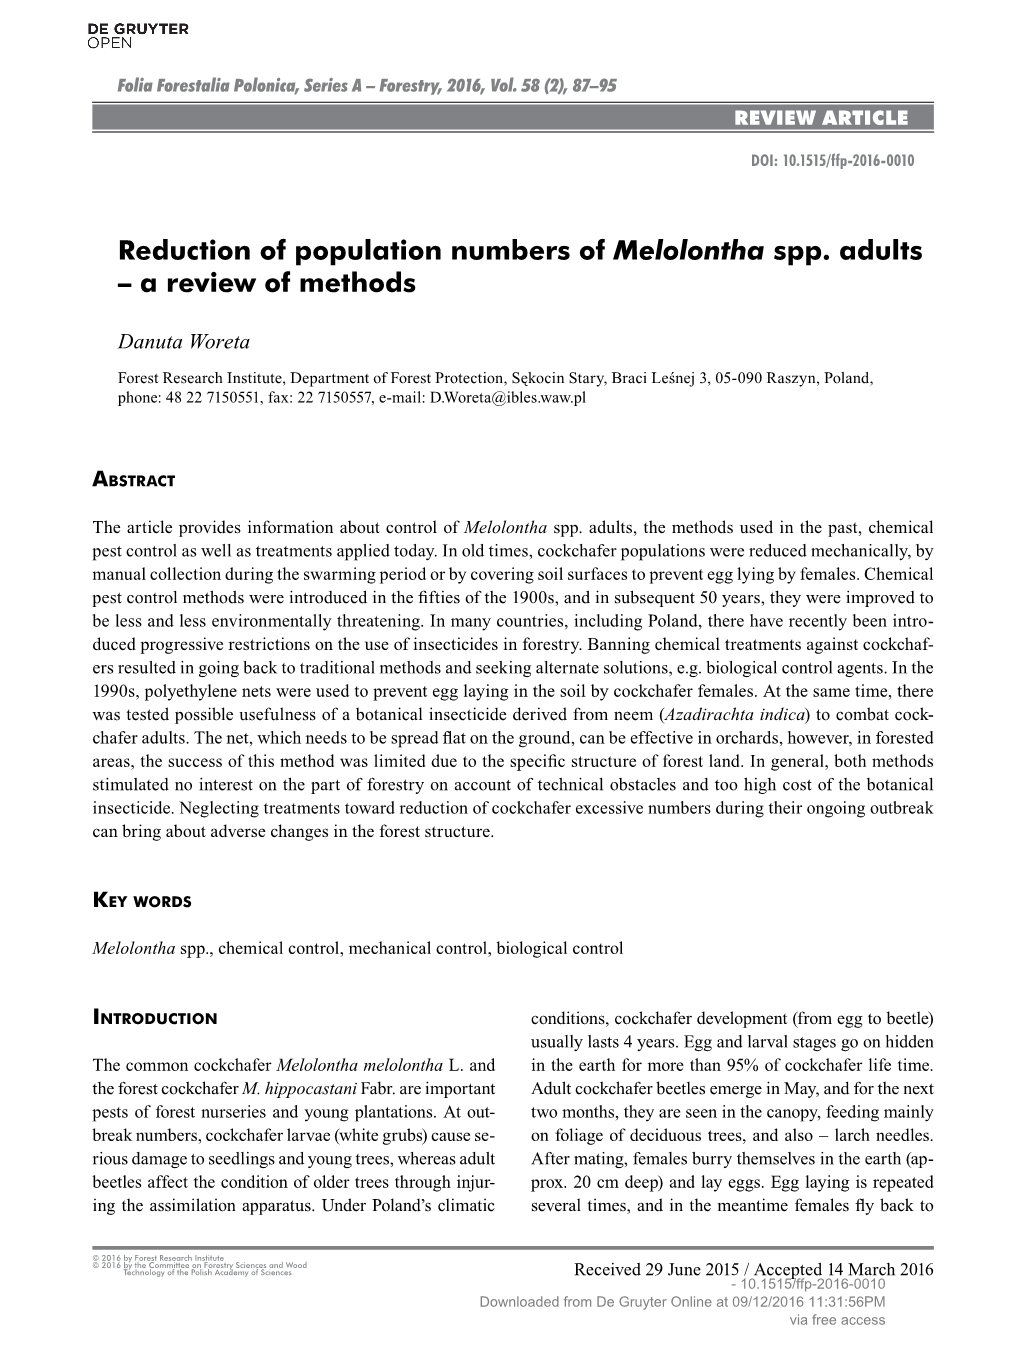 Reduction of Population Numbers of Melolontha Spp